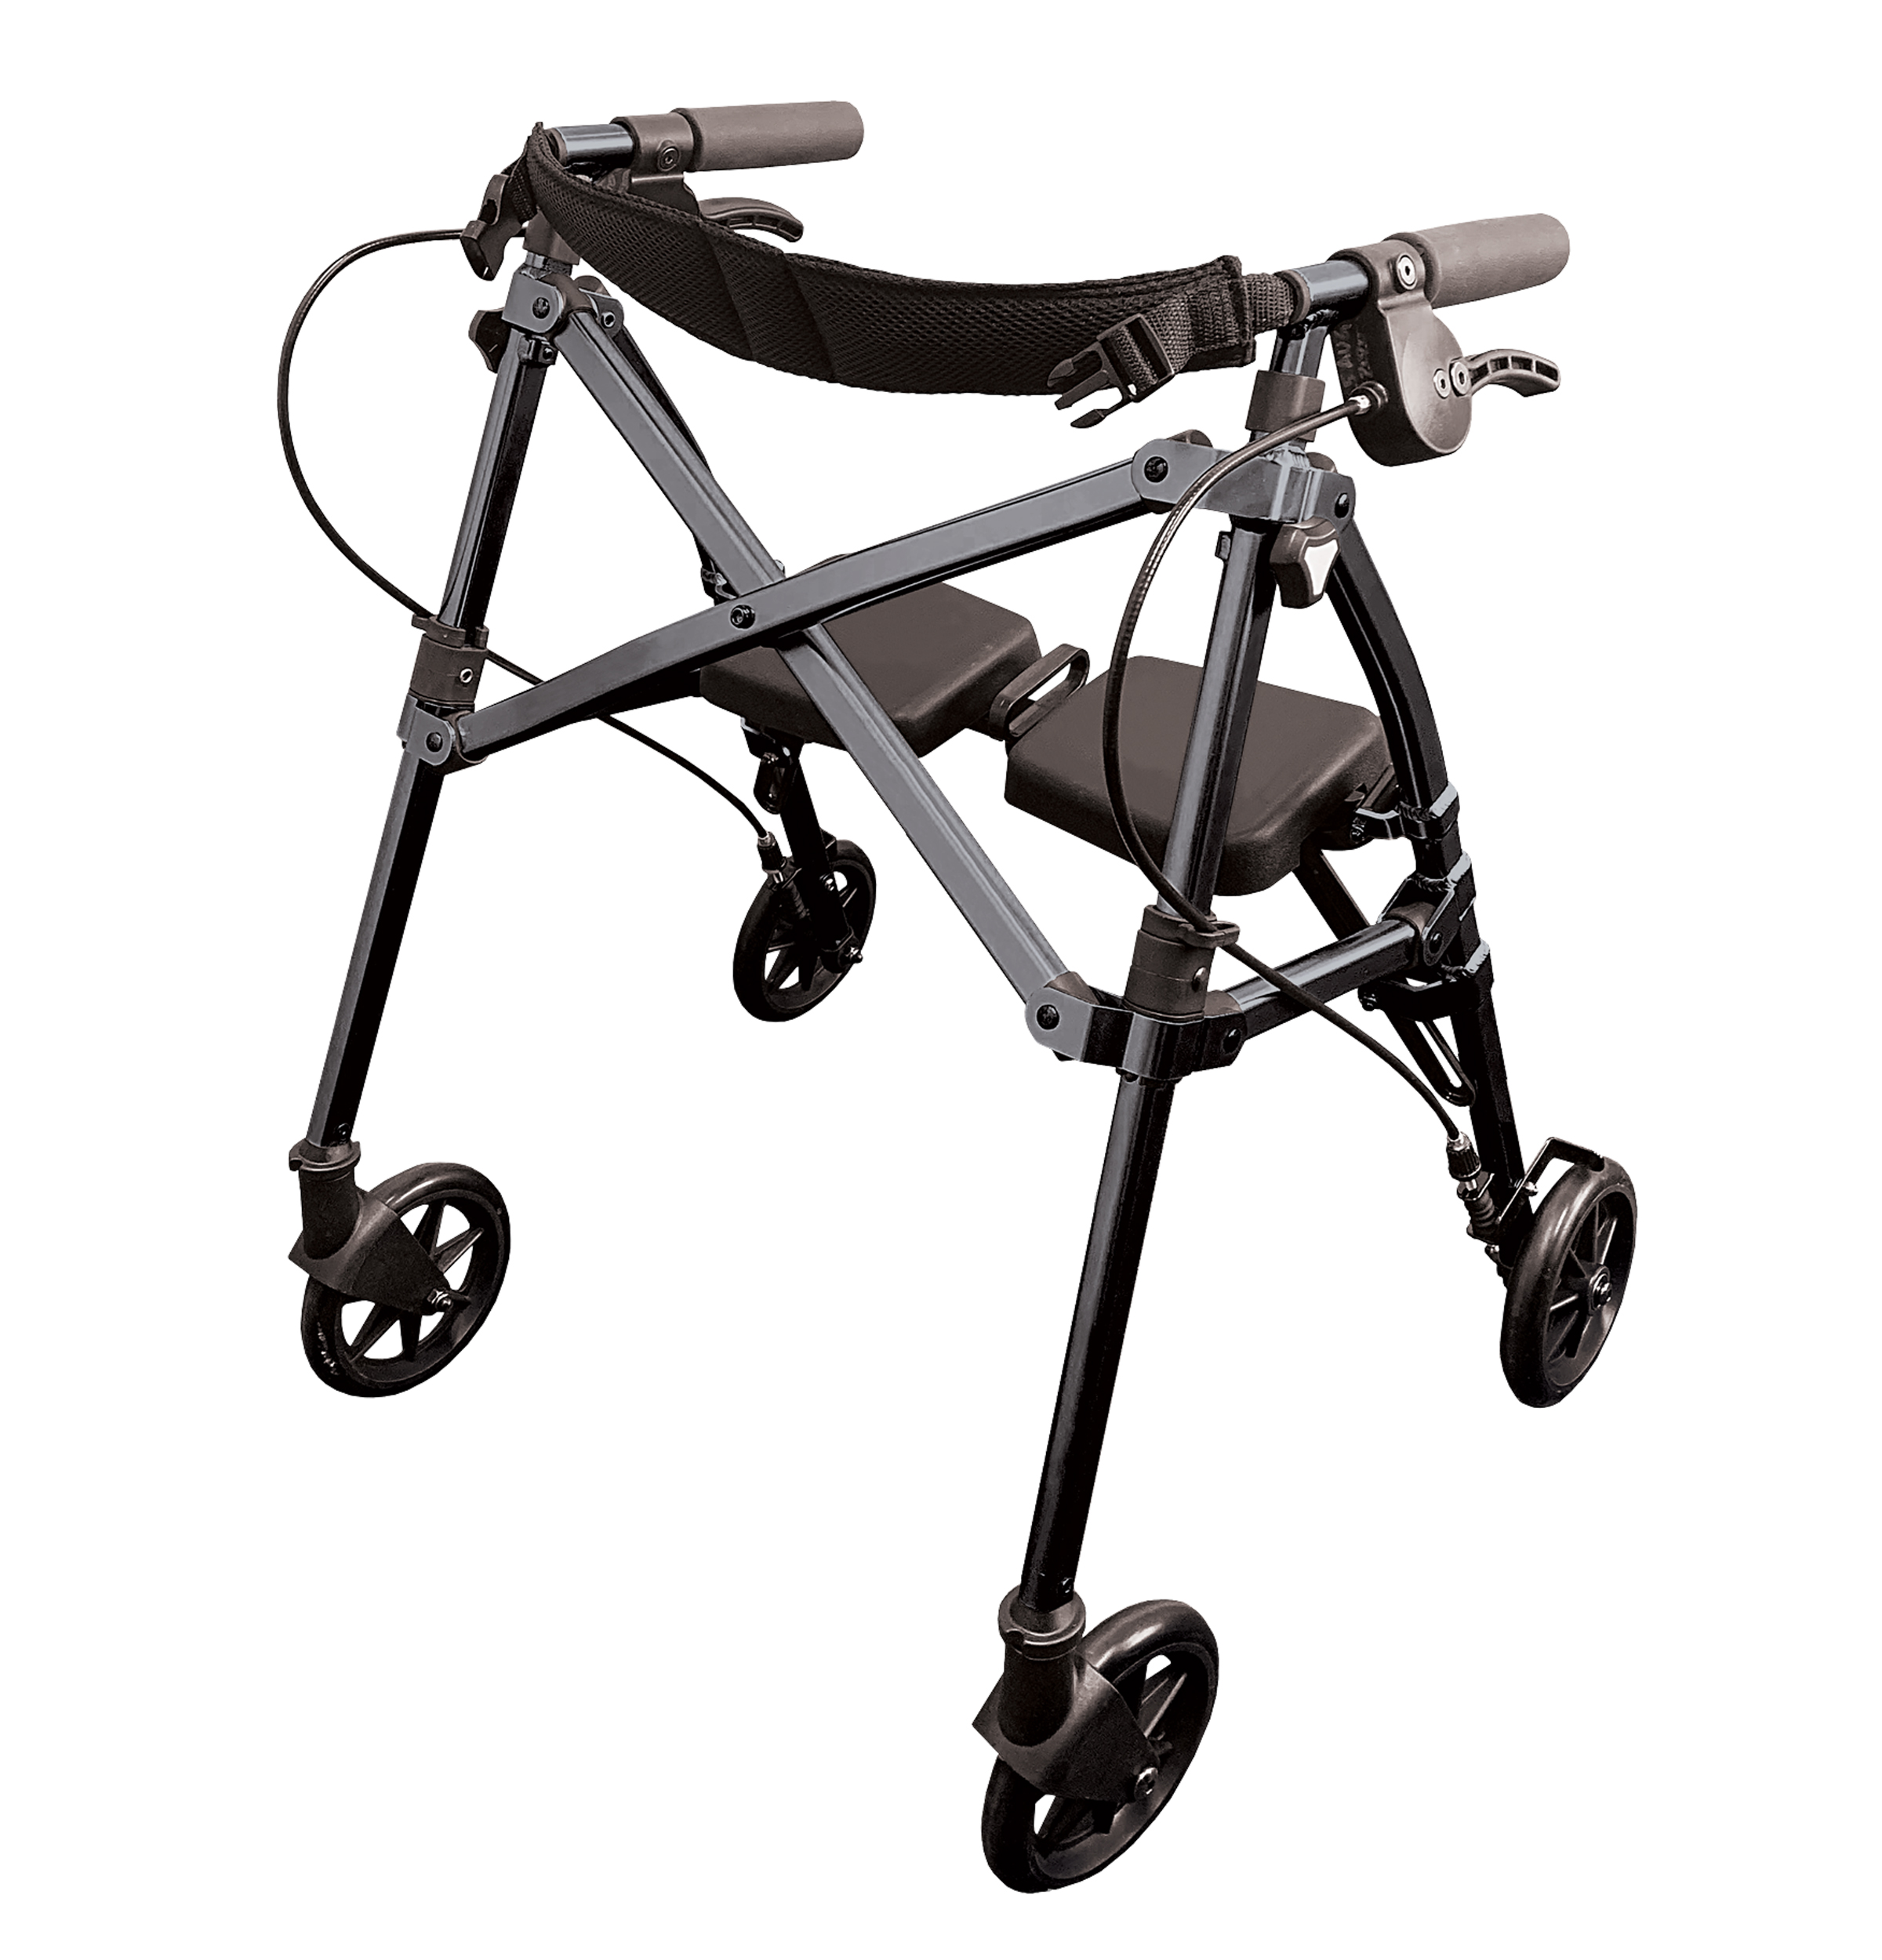 Able Life Space Saver Rollator Short, Lightweight Junior Folding Walker for Seniors, Petite Walker with Wheels and Seat, Black - image 1 of 8